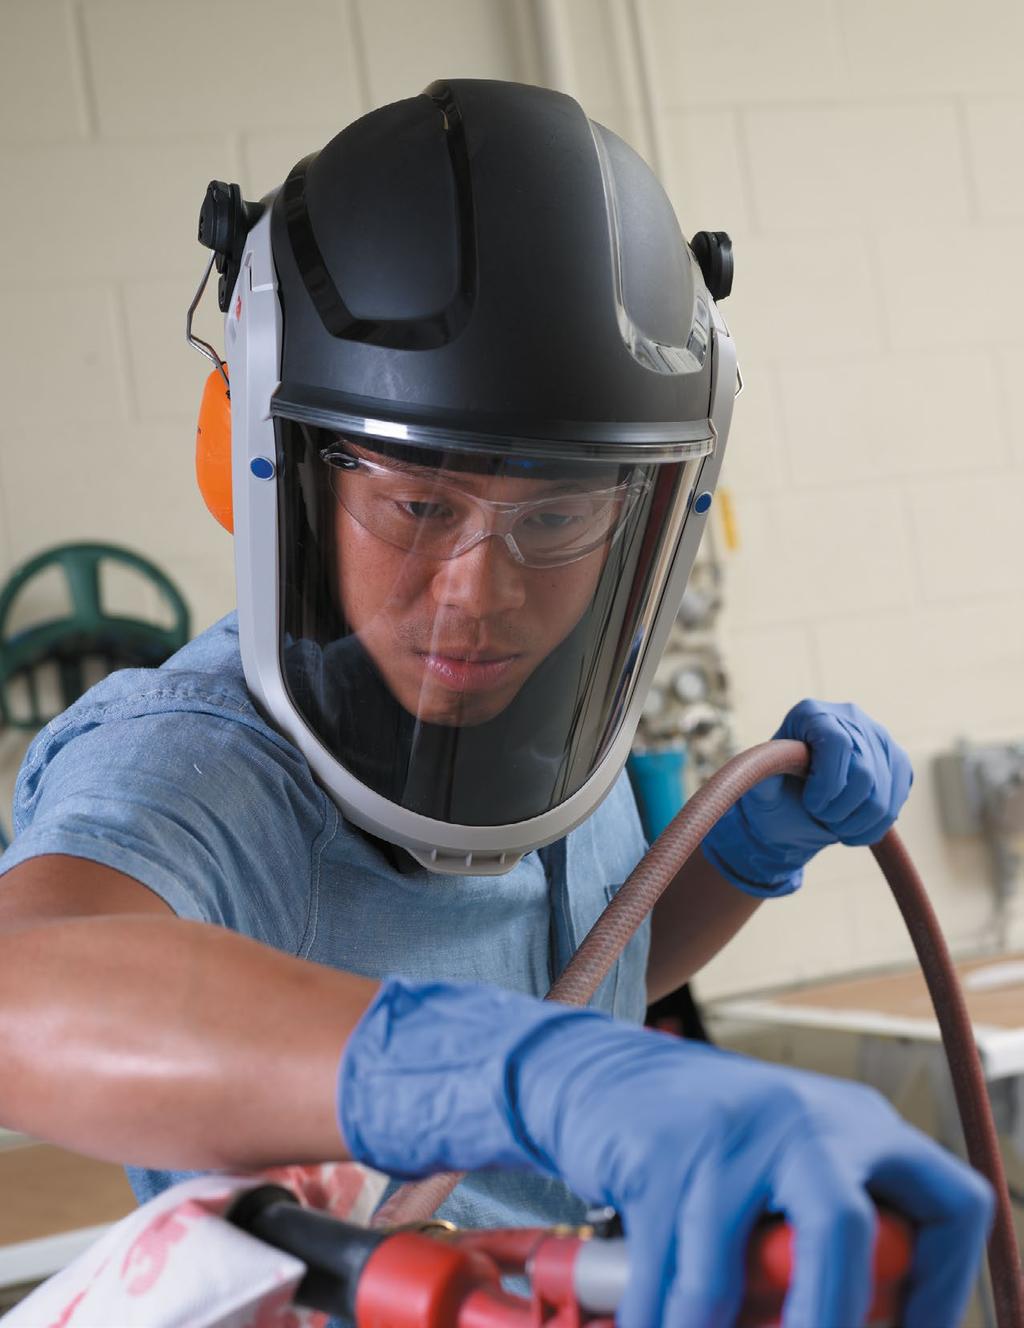 Advanced protective headgear. Applied to making work more comfortable.